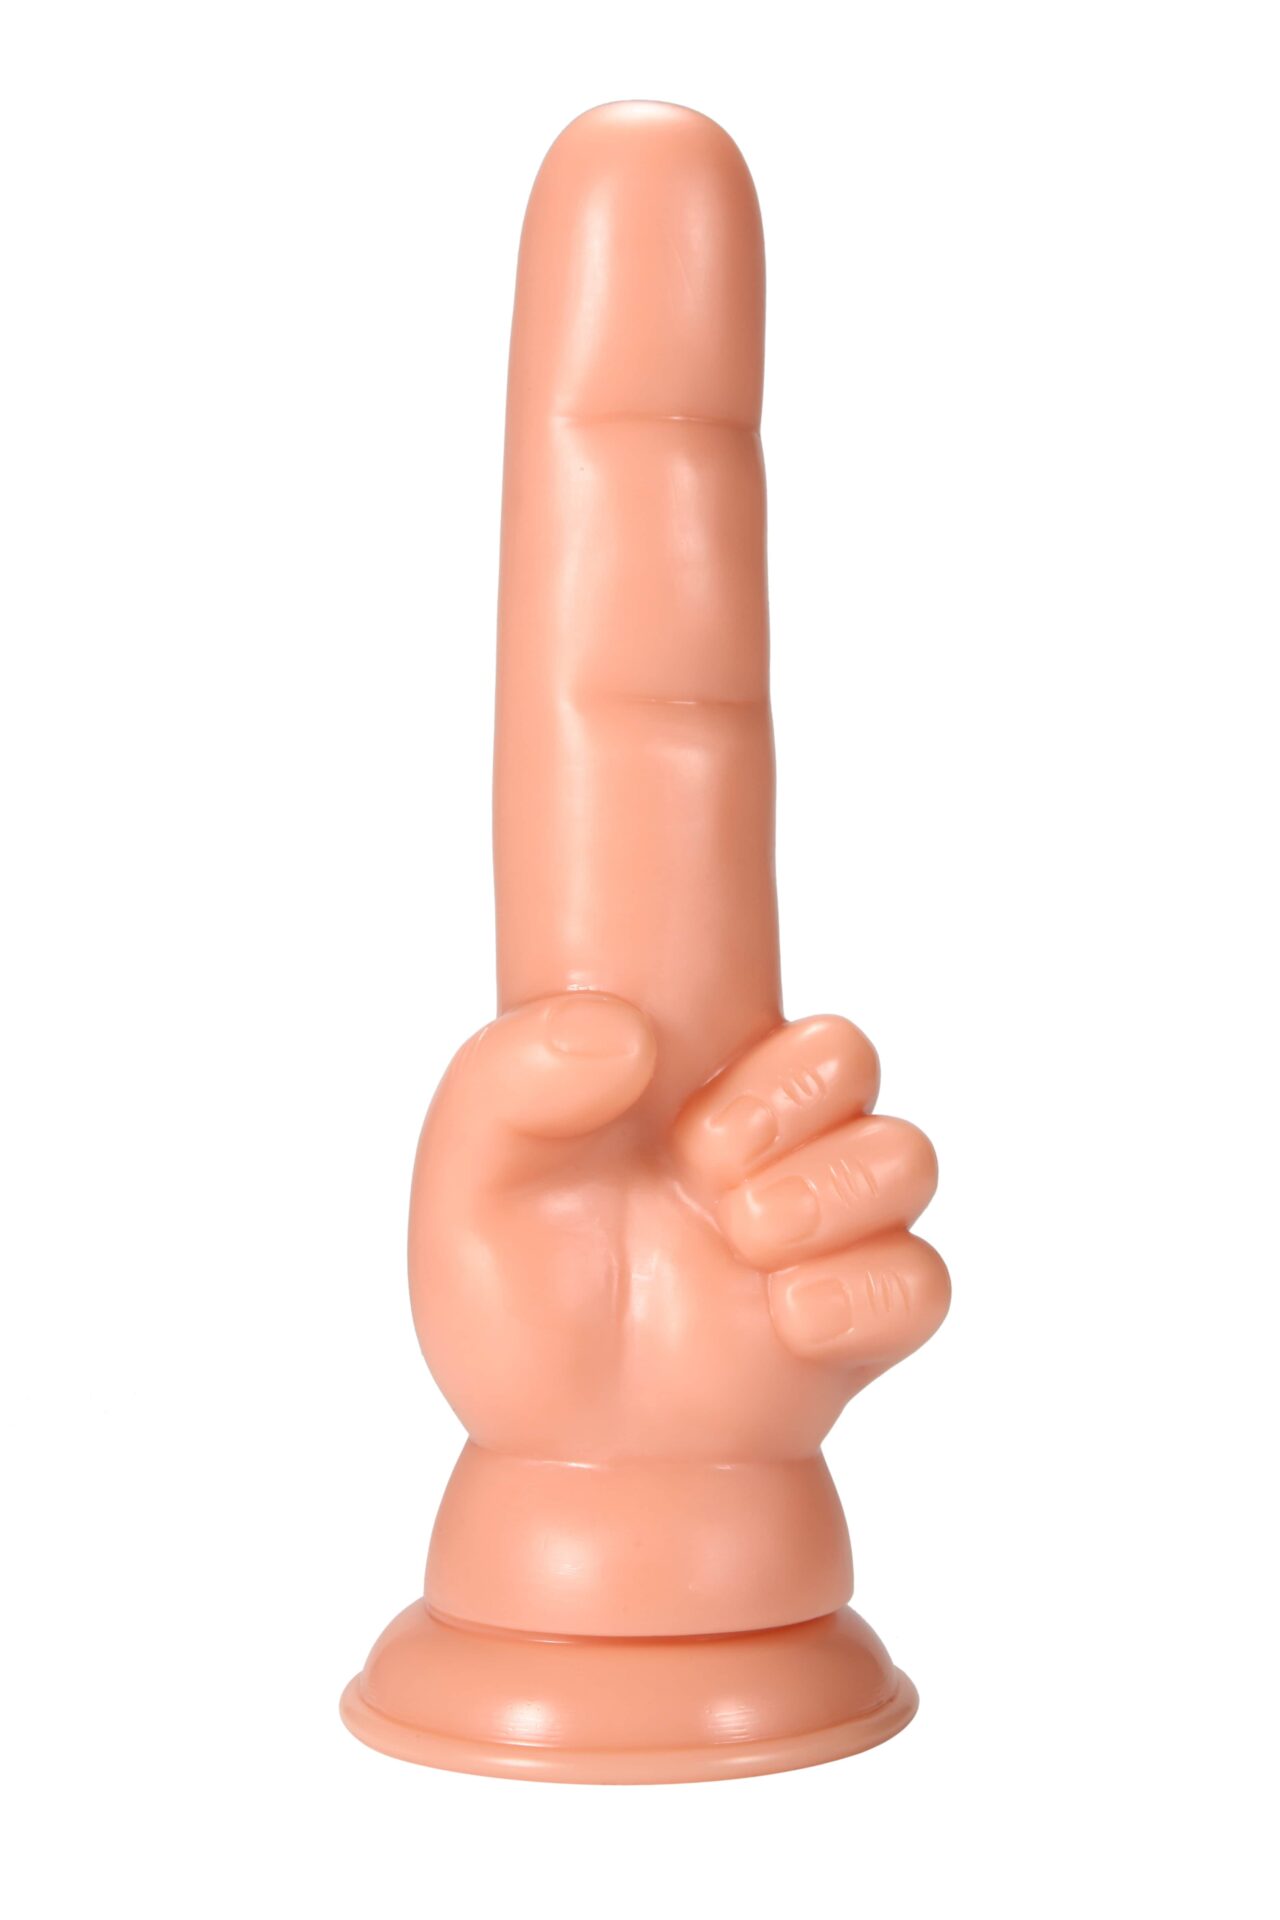 Large Hand Butt Plug 12.1 Inches